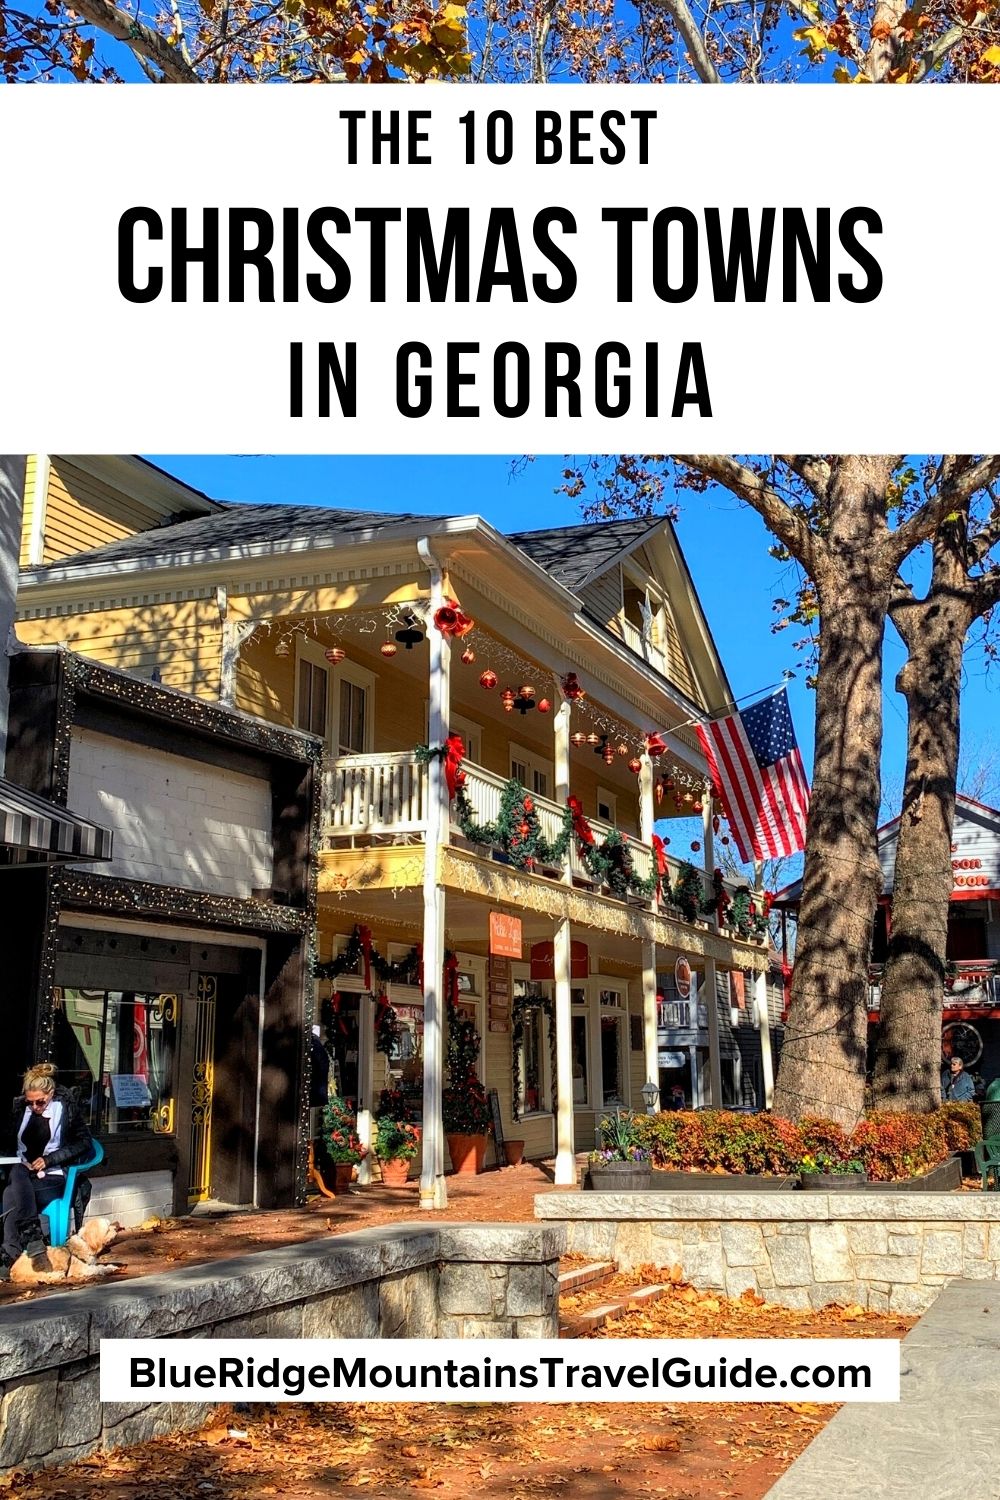 The 15 Best Christmas Towns in Georgia to Visit